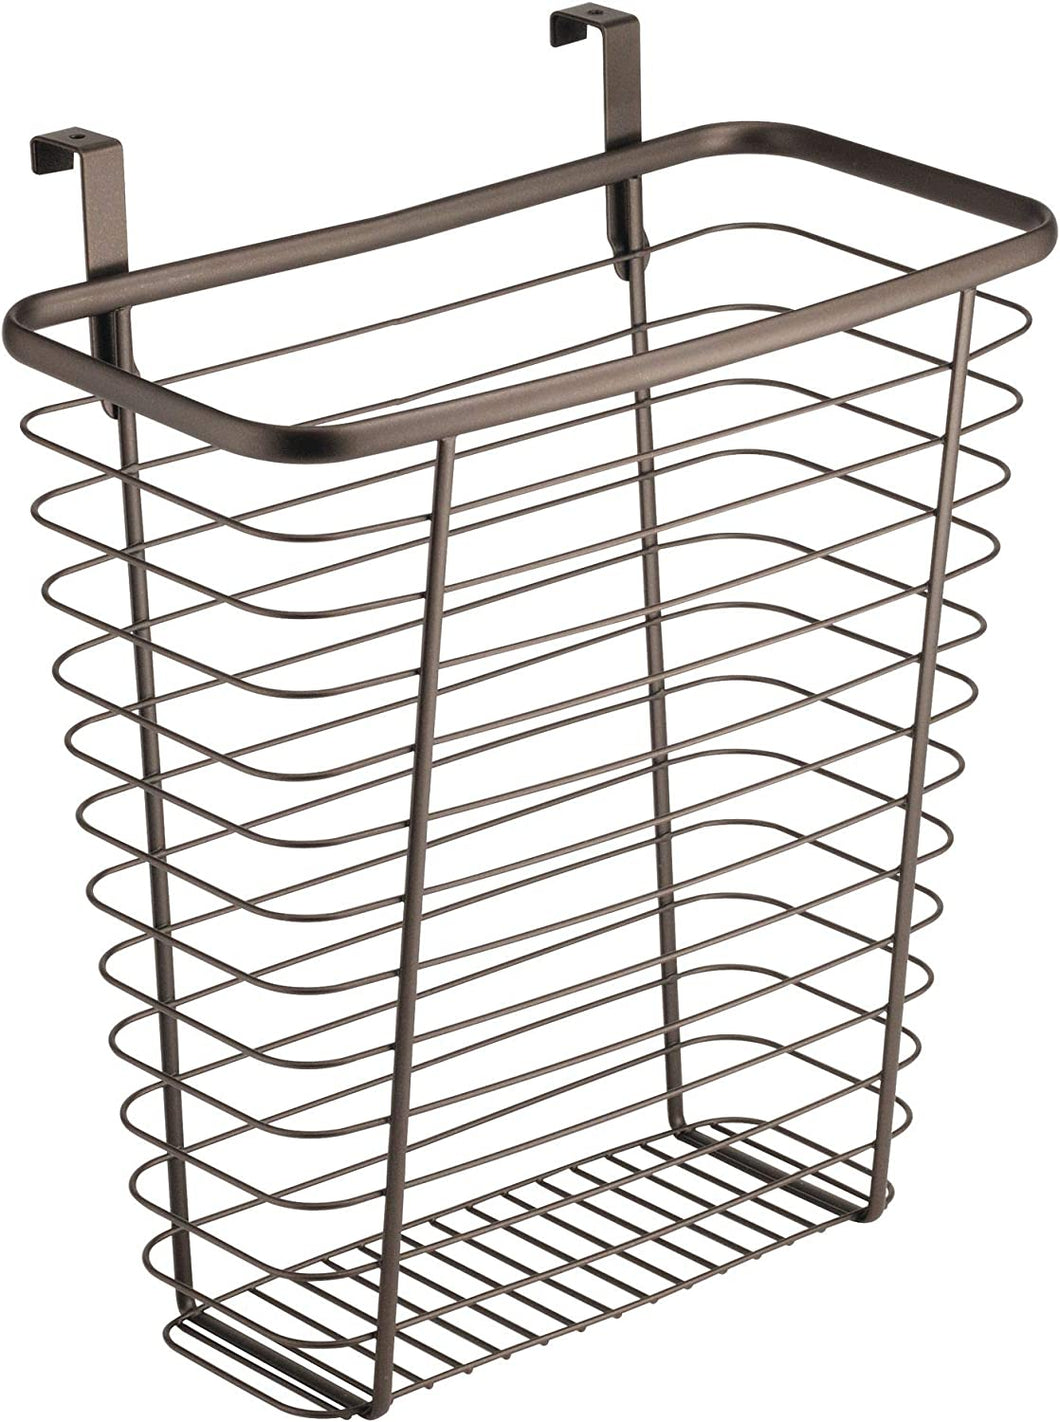 Axis Over The Cabinet Organizer/Waste Basket